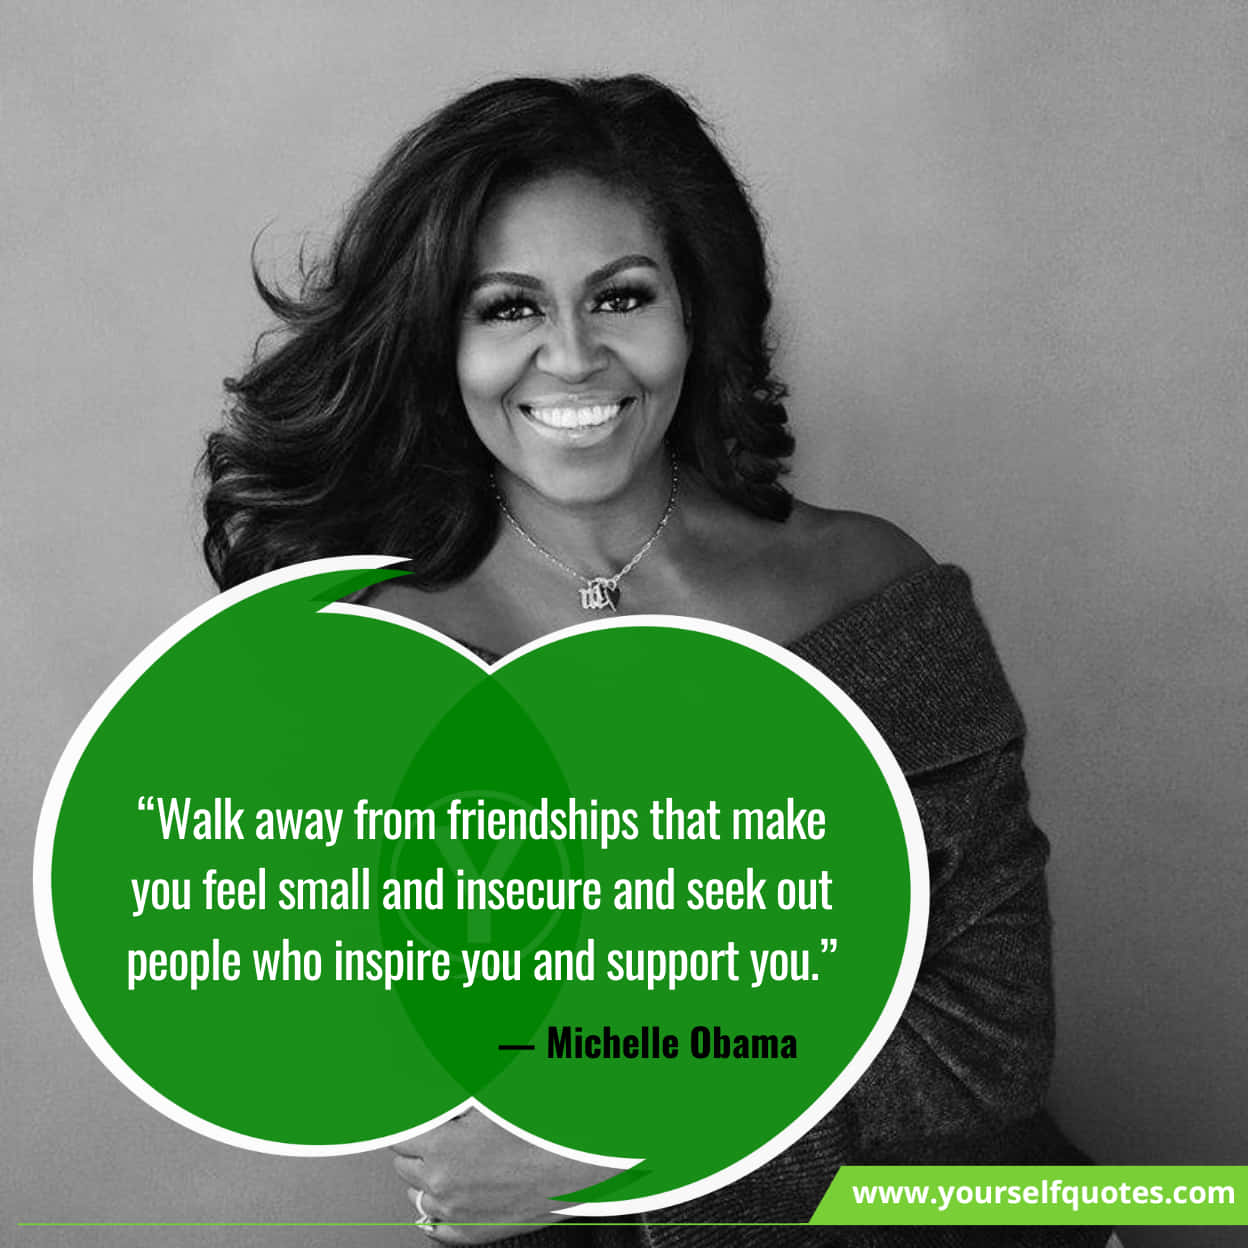 Michelle Obama Quotes For Life